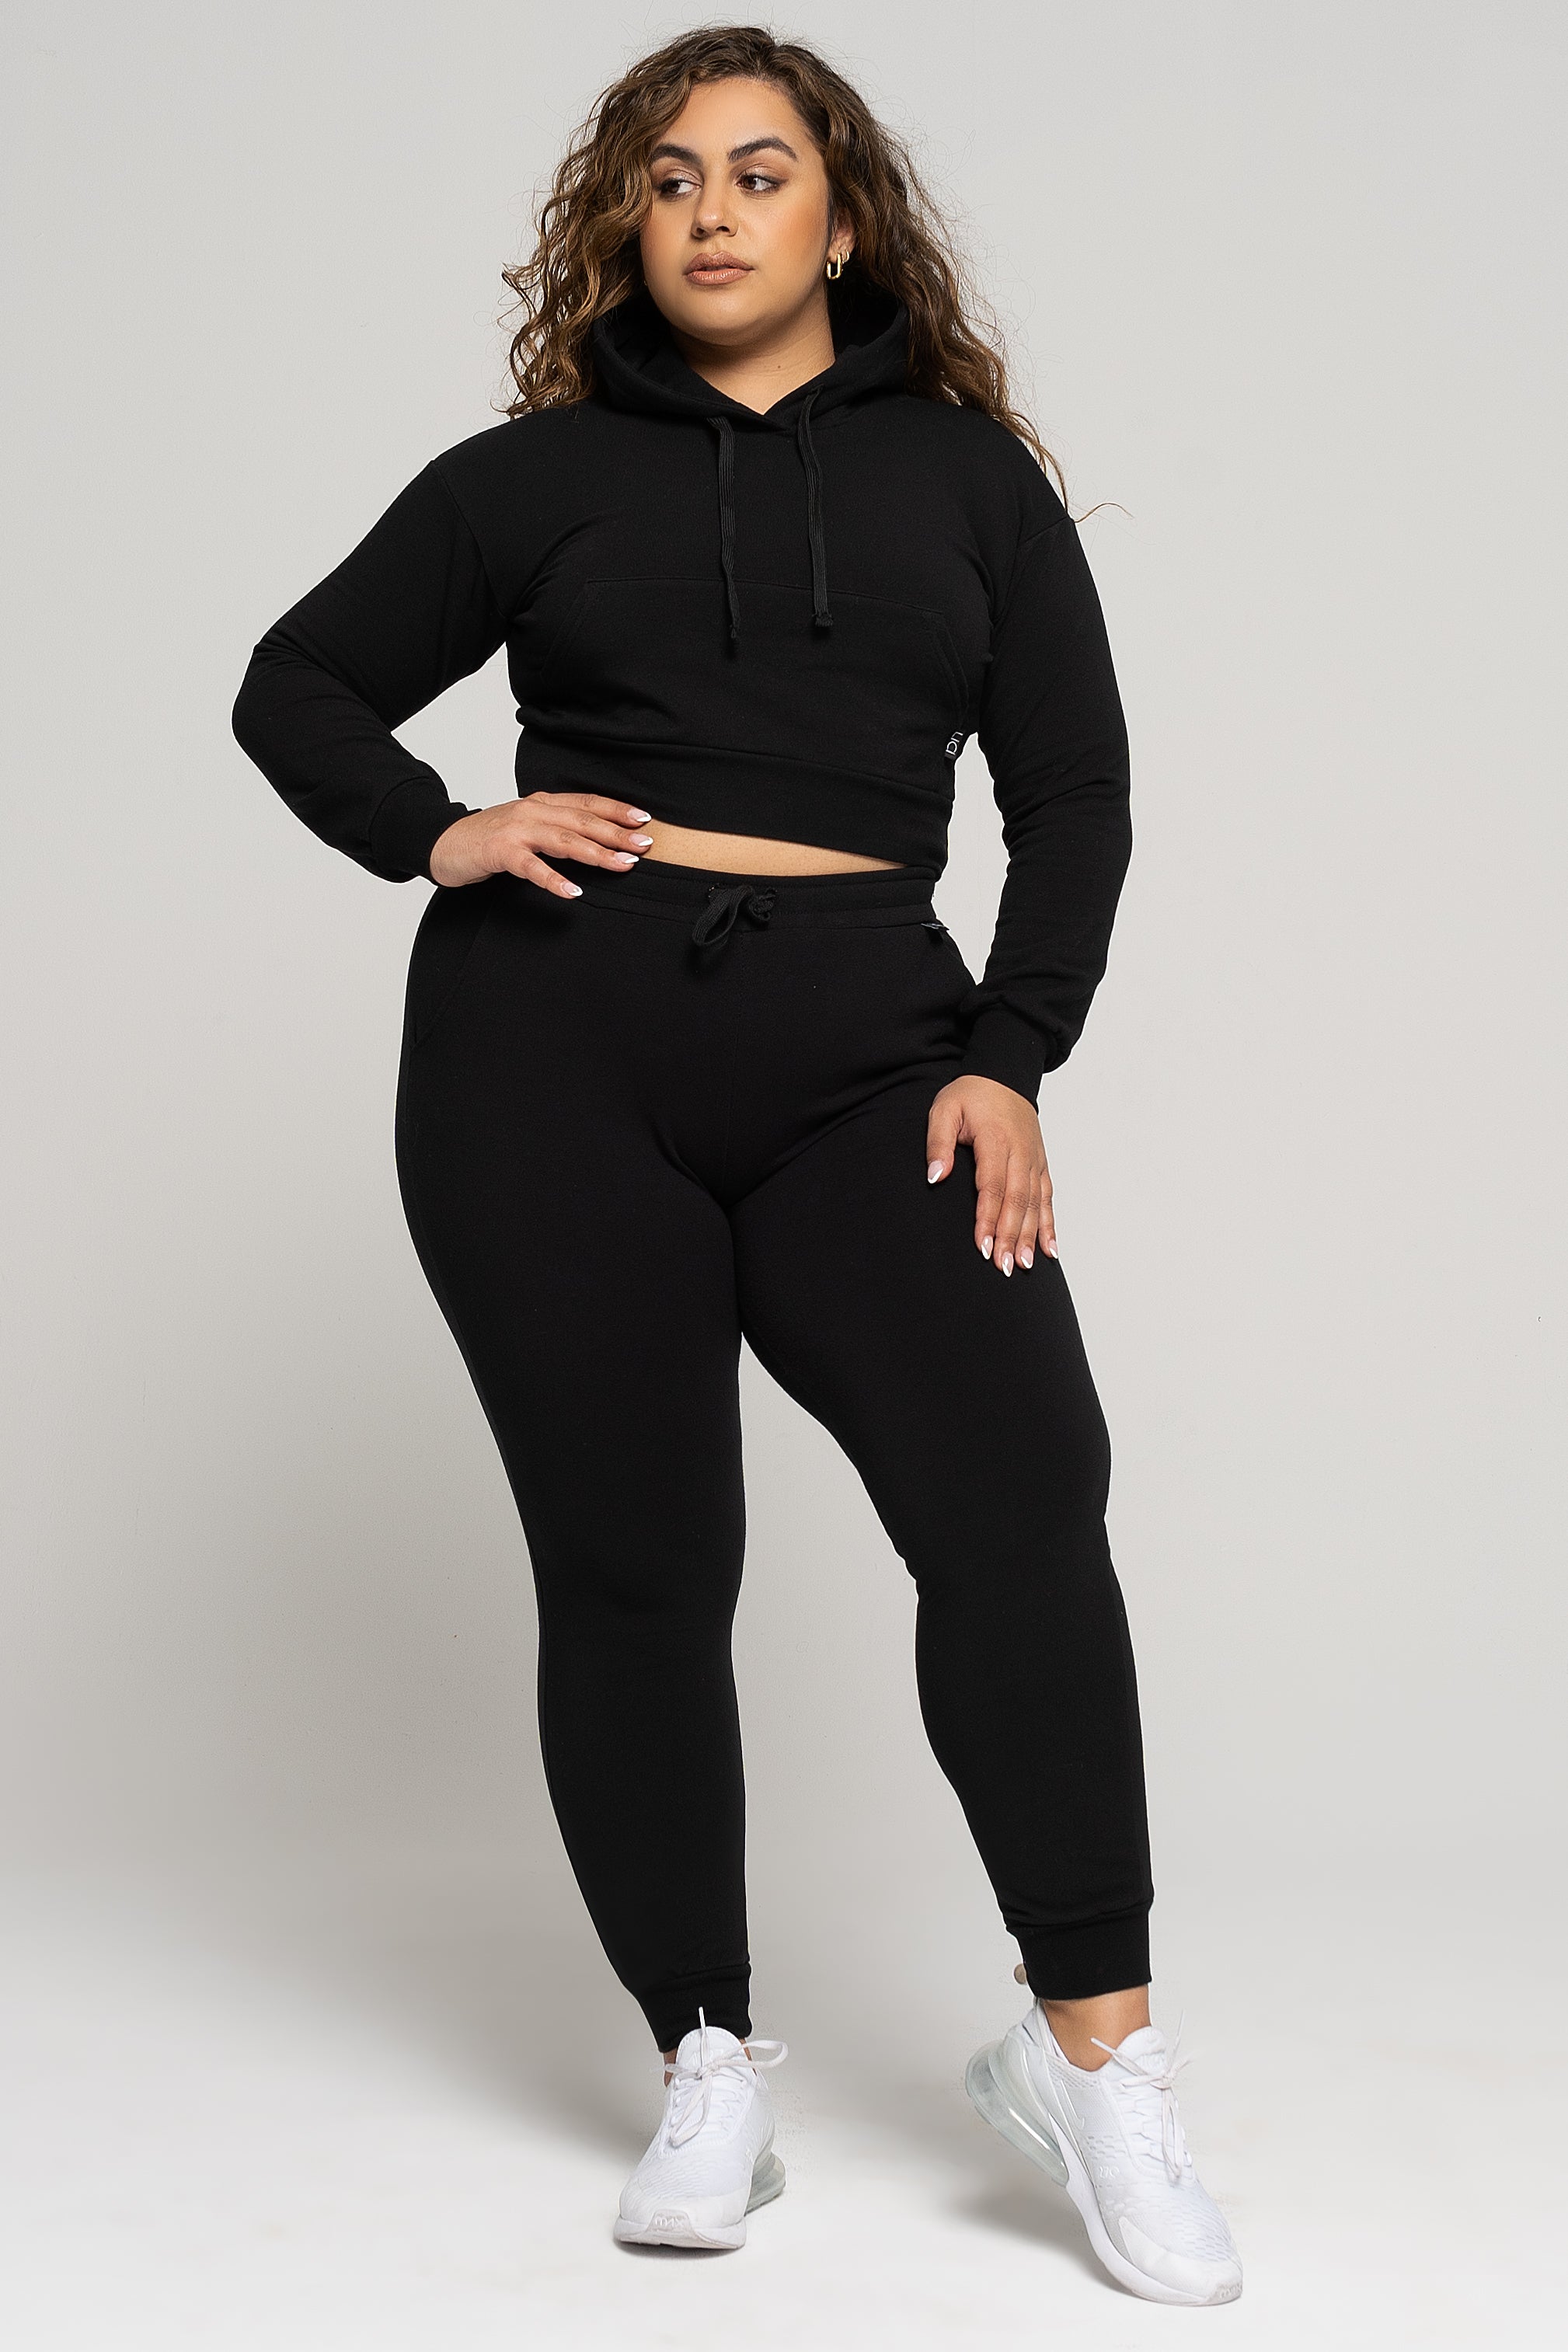 LiCi Fit Black Fitted Crop Hoodie & Black Fitted Sweat Pants